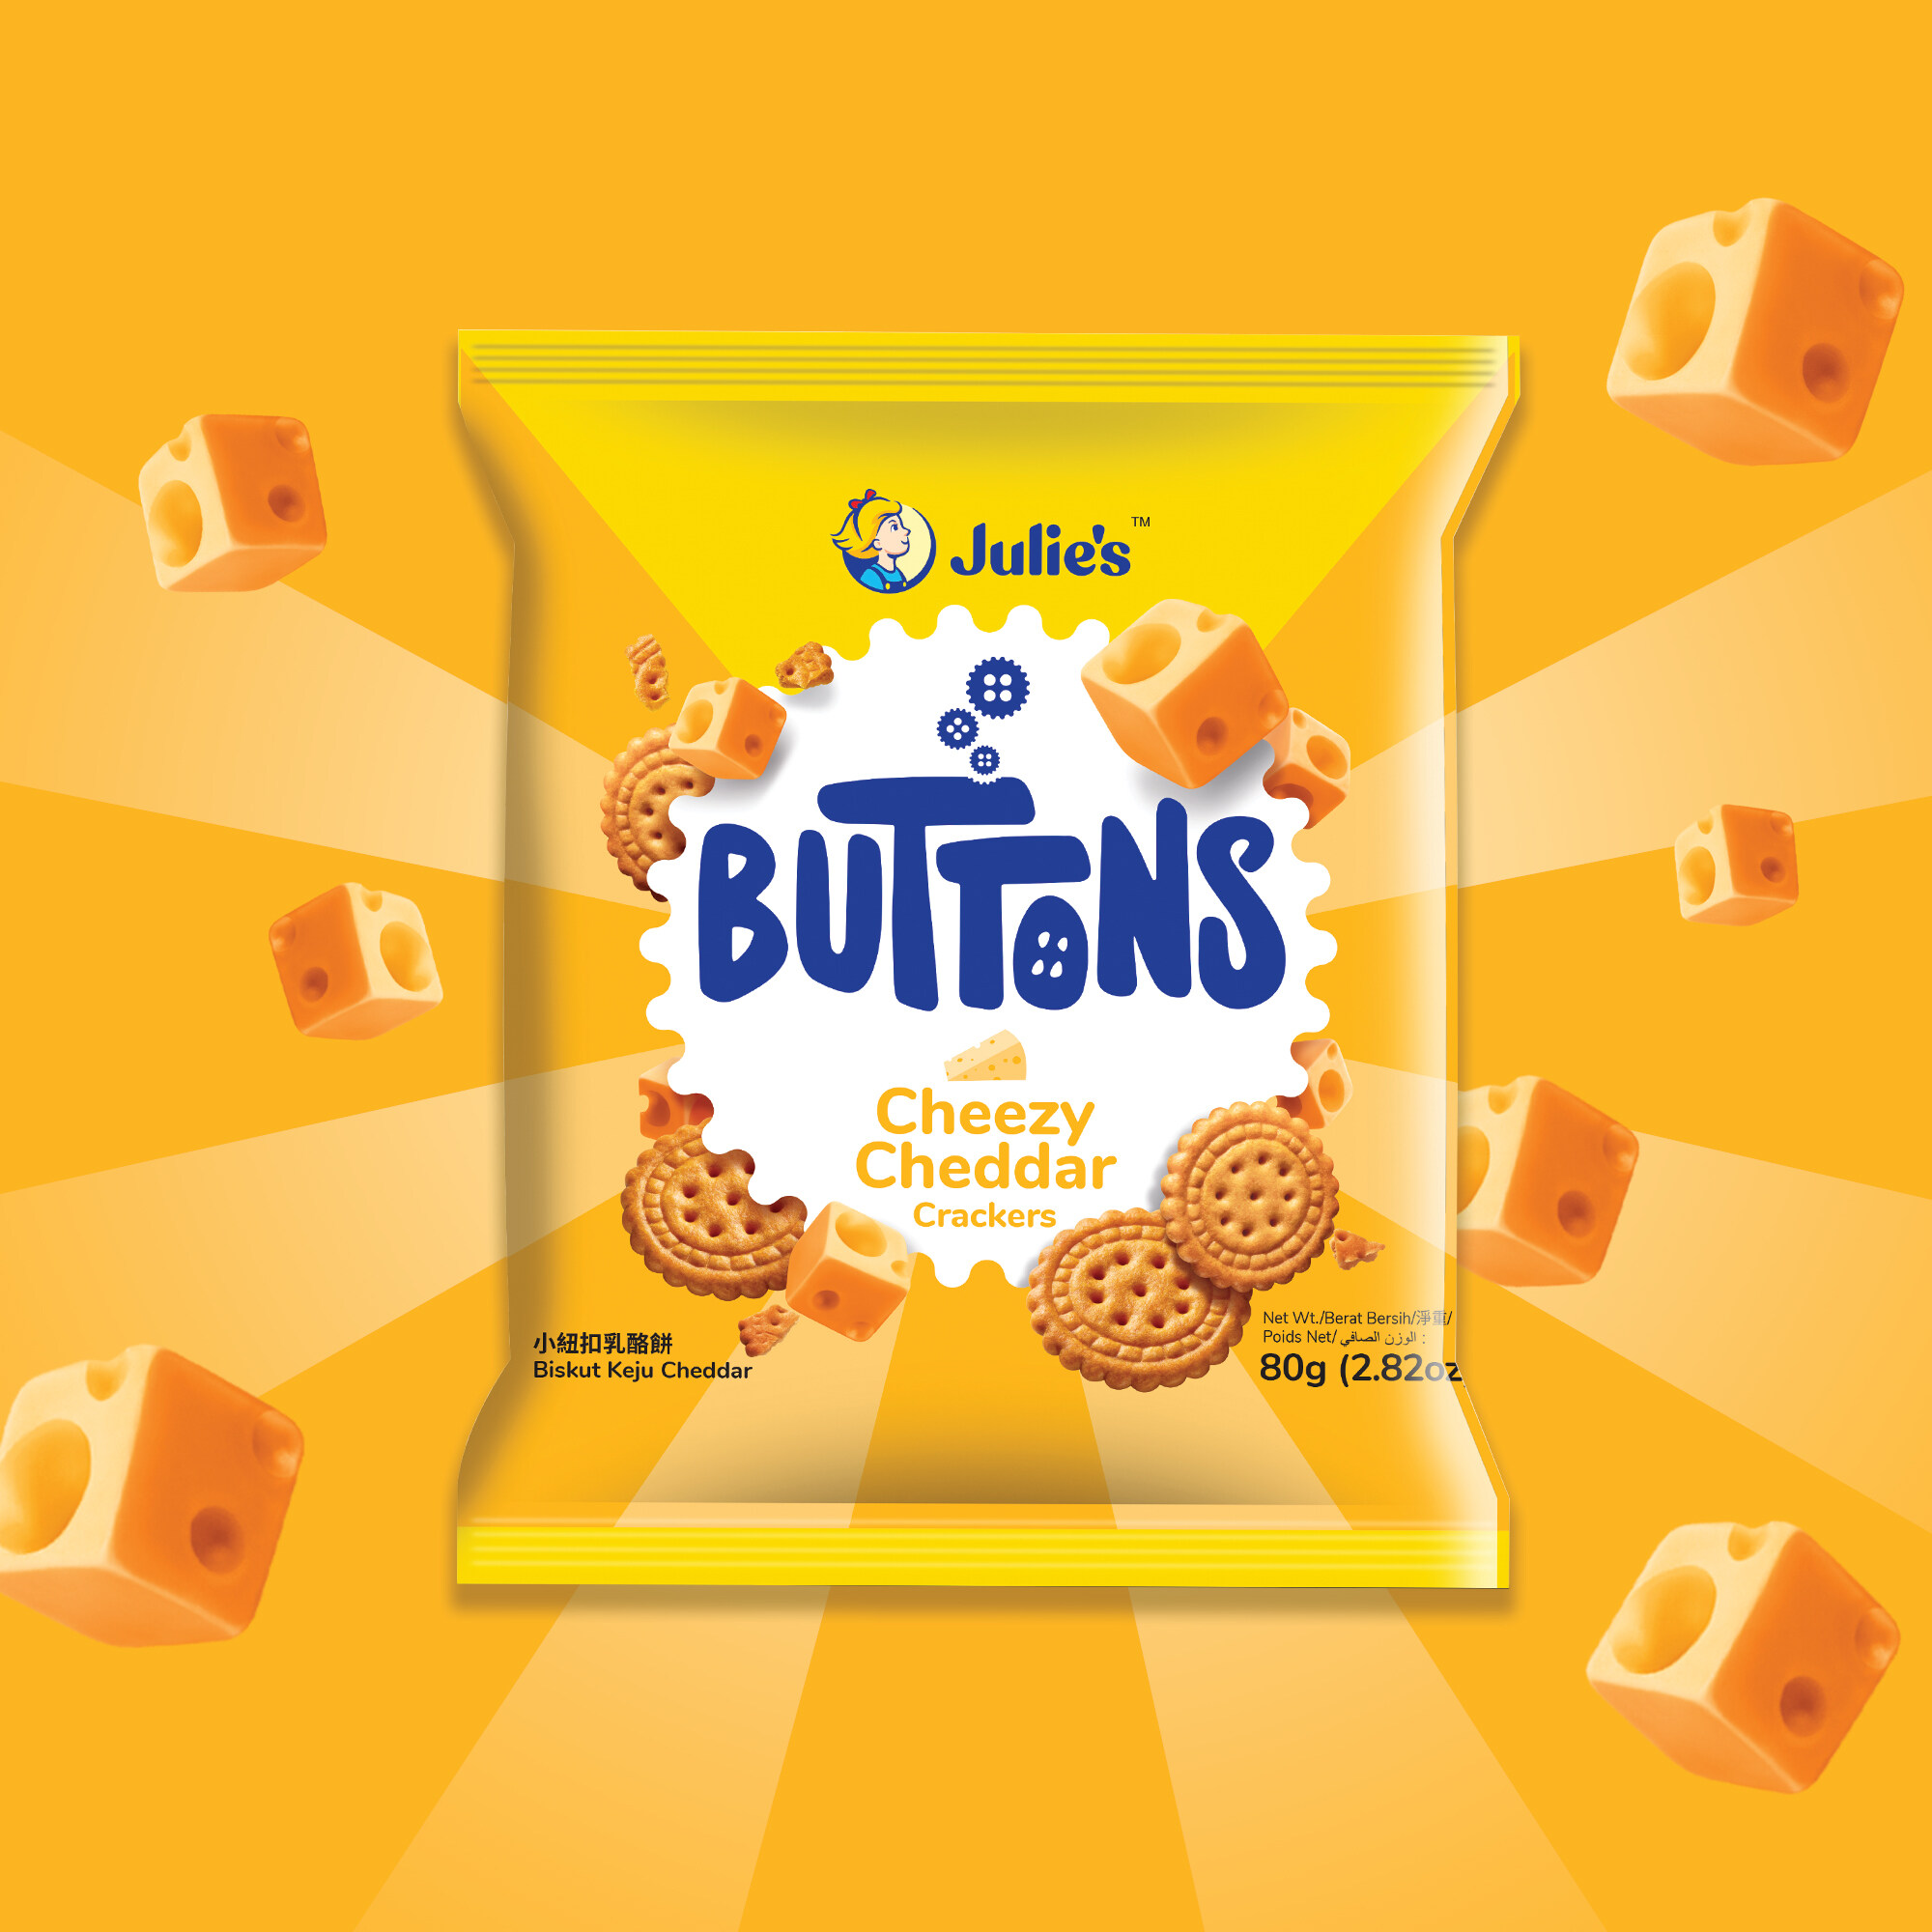 Julie's Buttons Cheezy Cheddar Crackers 80g x 6 packs